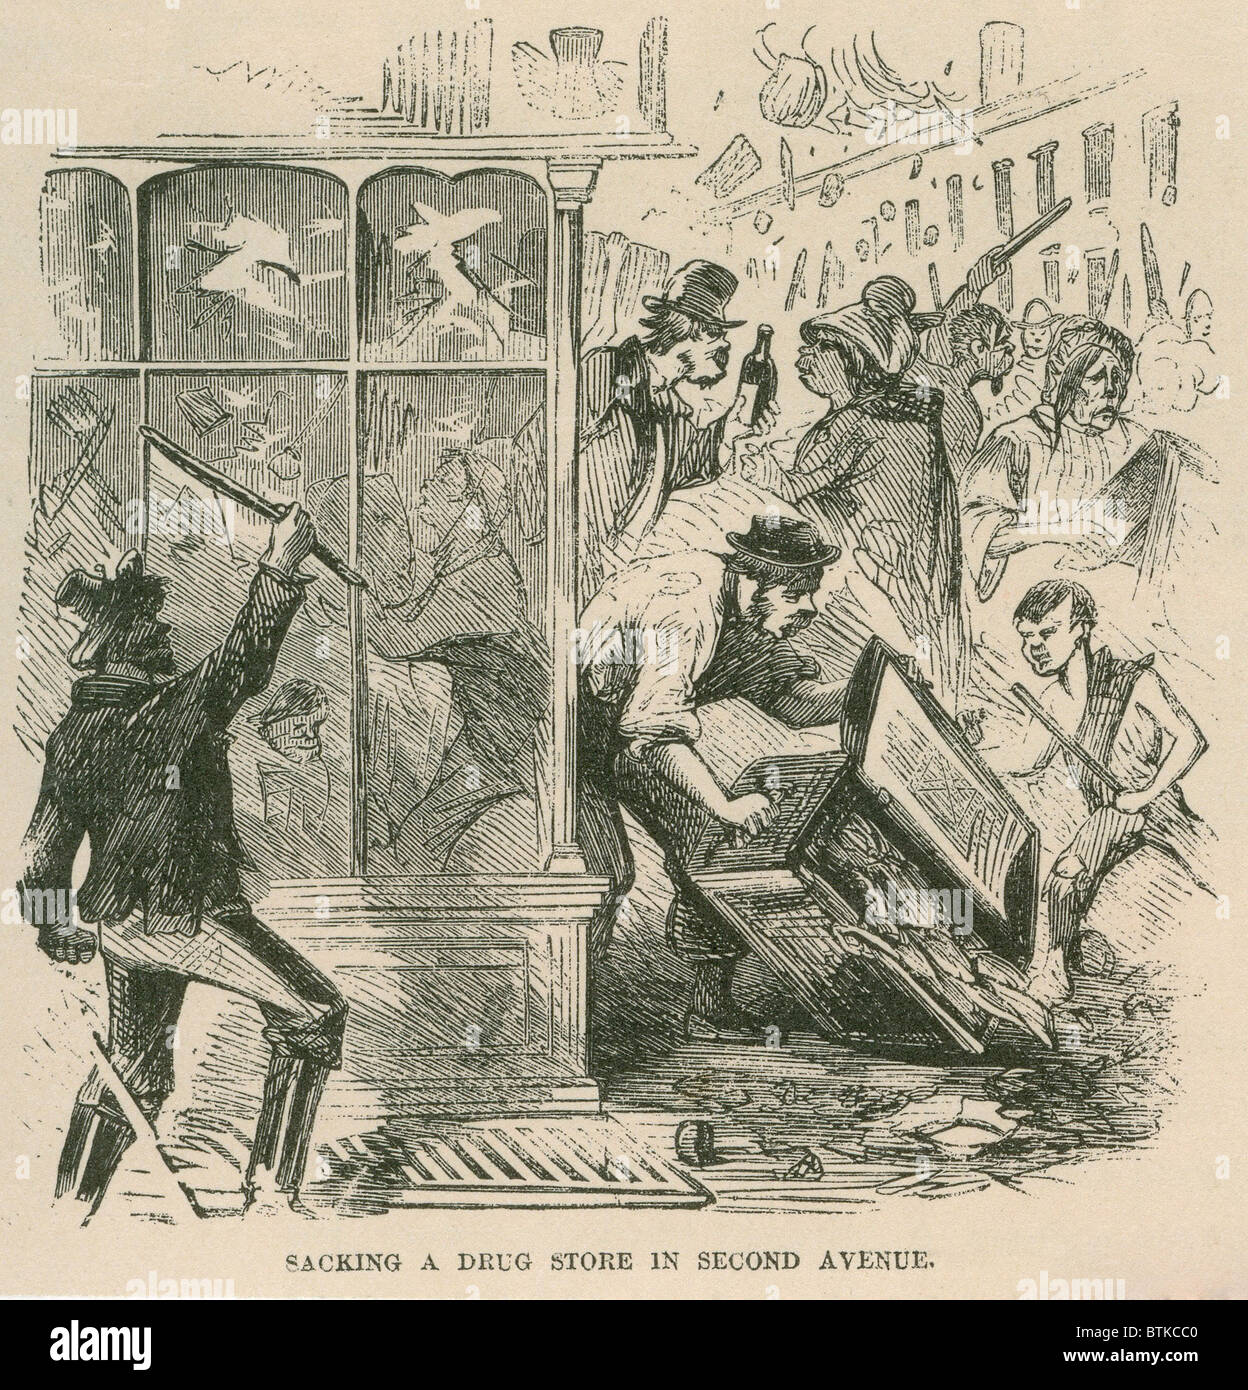 Mob looting of a drug store on Second Avenue during Draft Riots in New York City of July 13-16, 1863. The riots started as protest against a federal conscription act, that spread to general disorder and resulted in the death of 120 people. Stock Photo